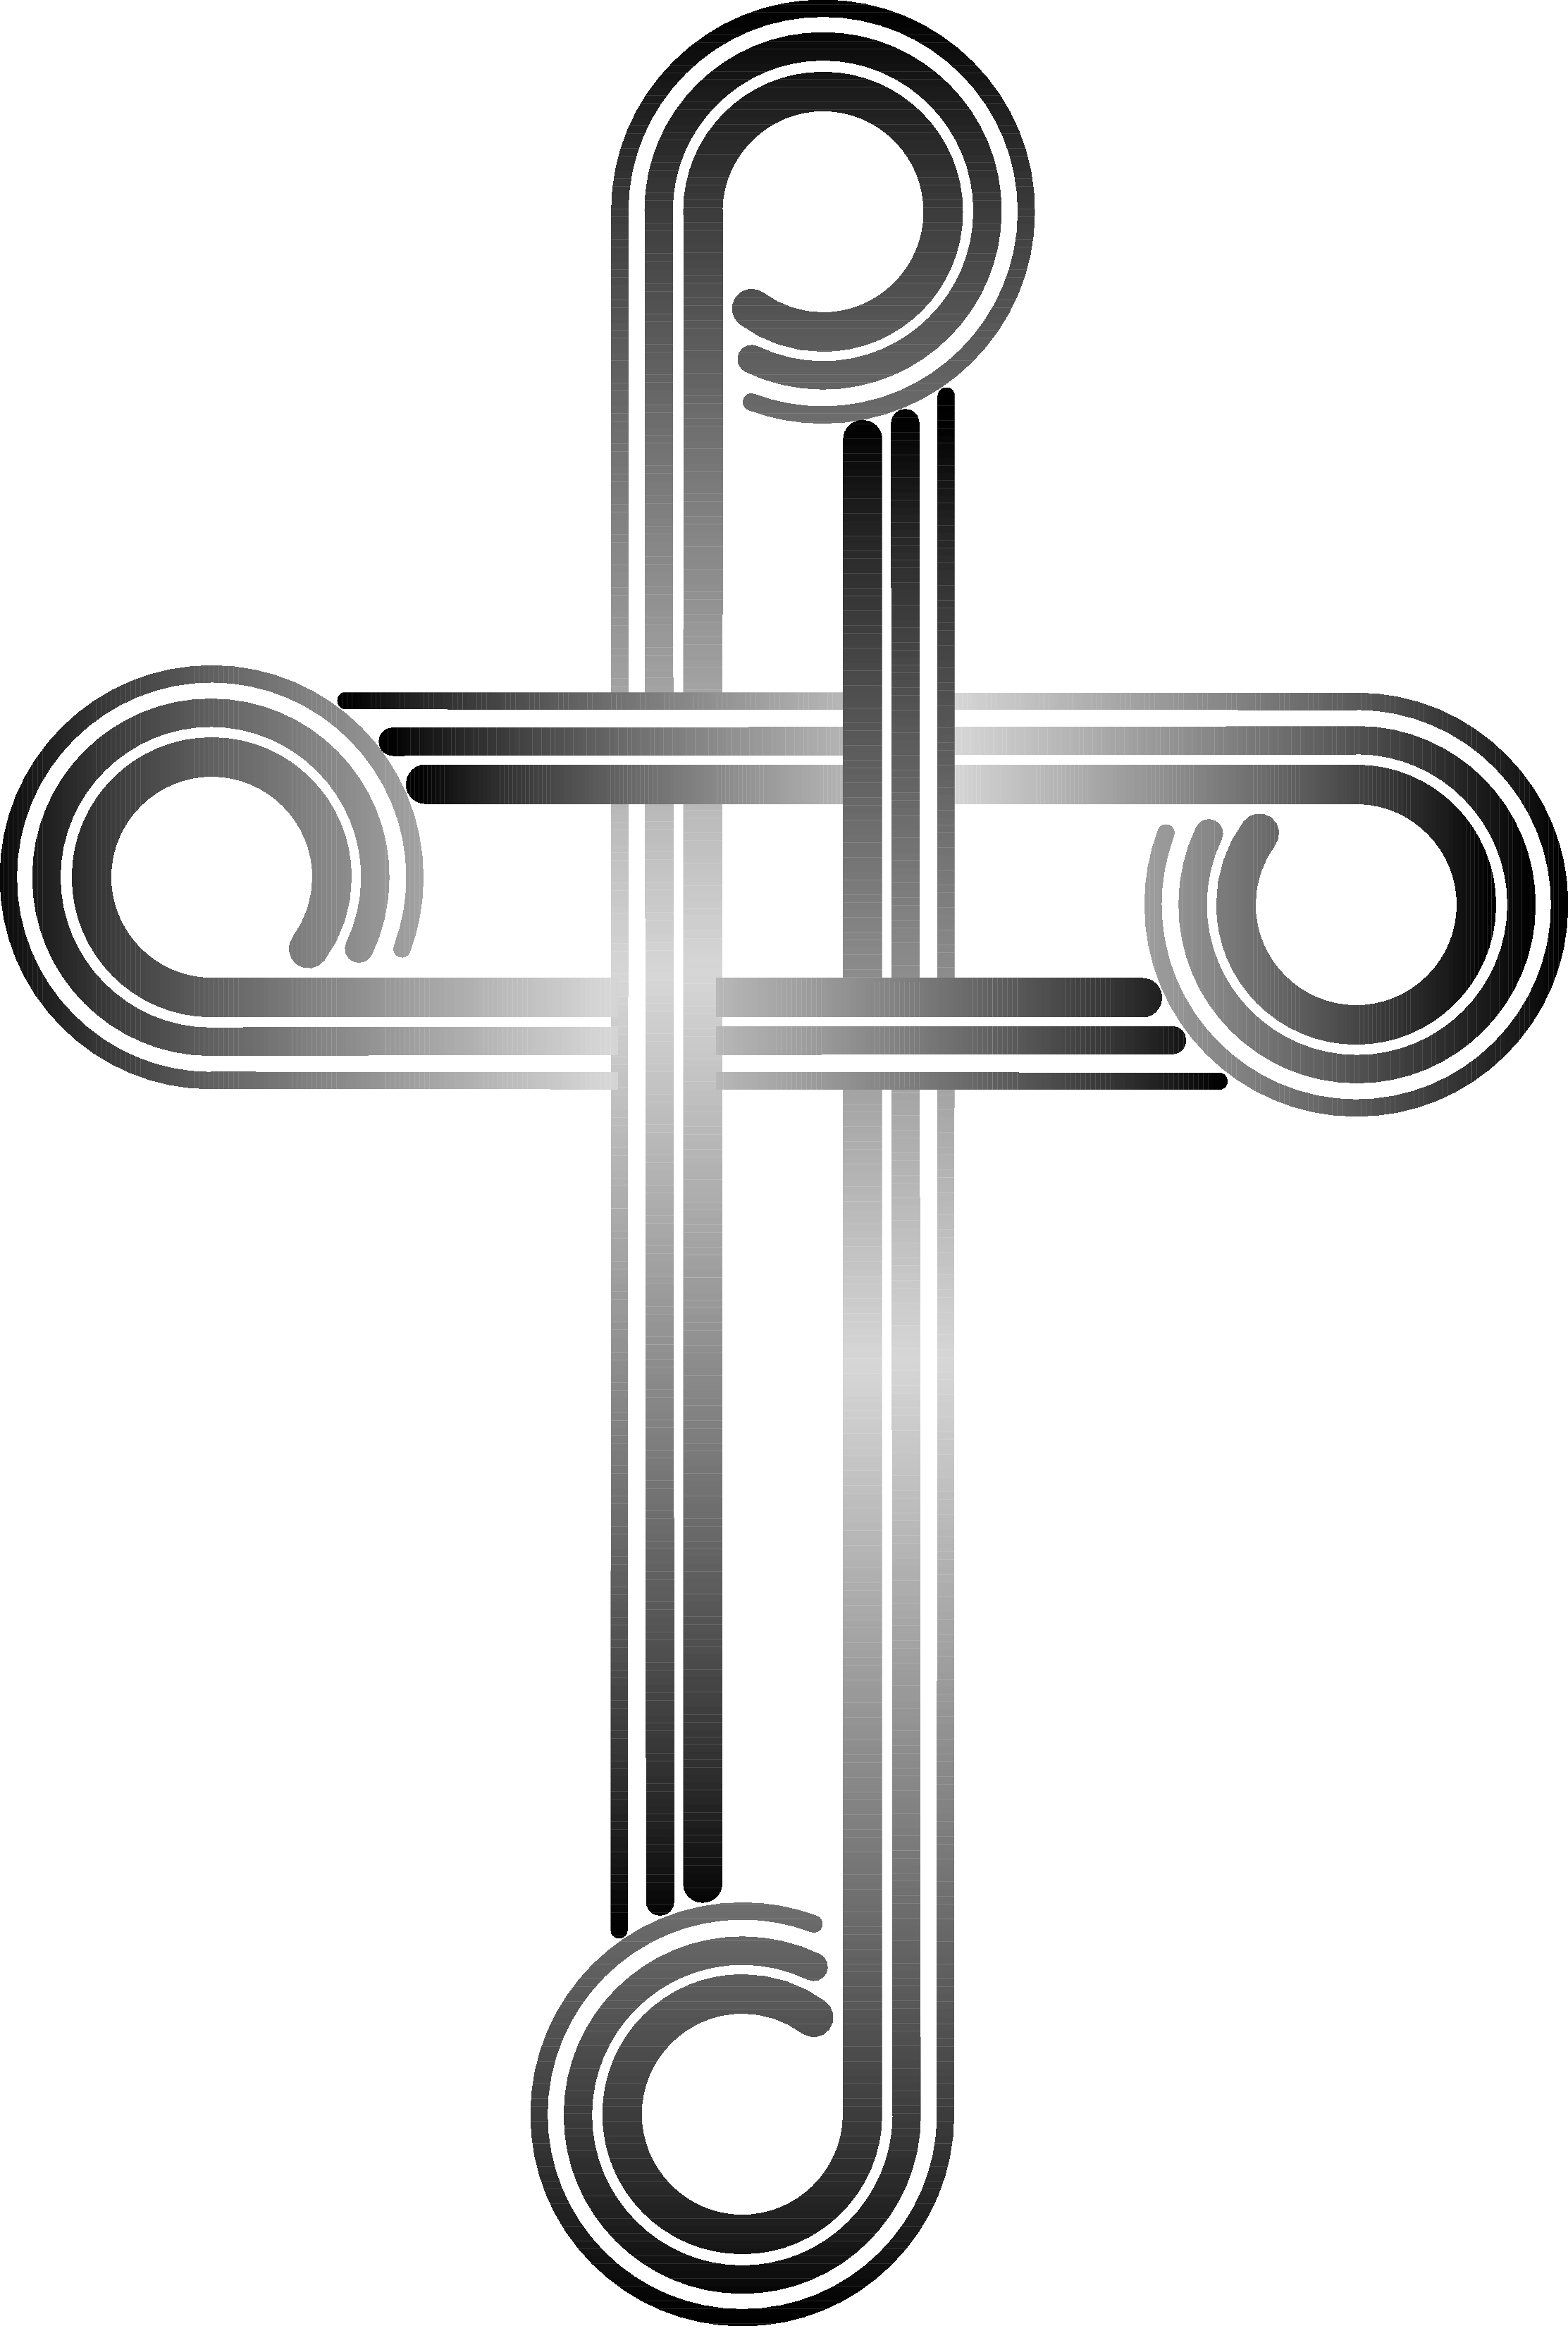 Christian Clipart Free Black And White - Cliparts.co